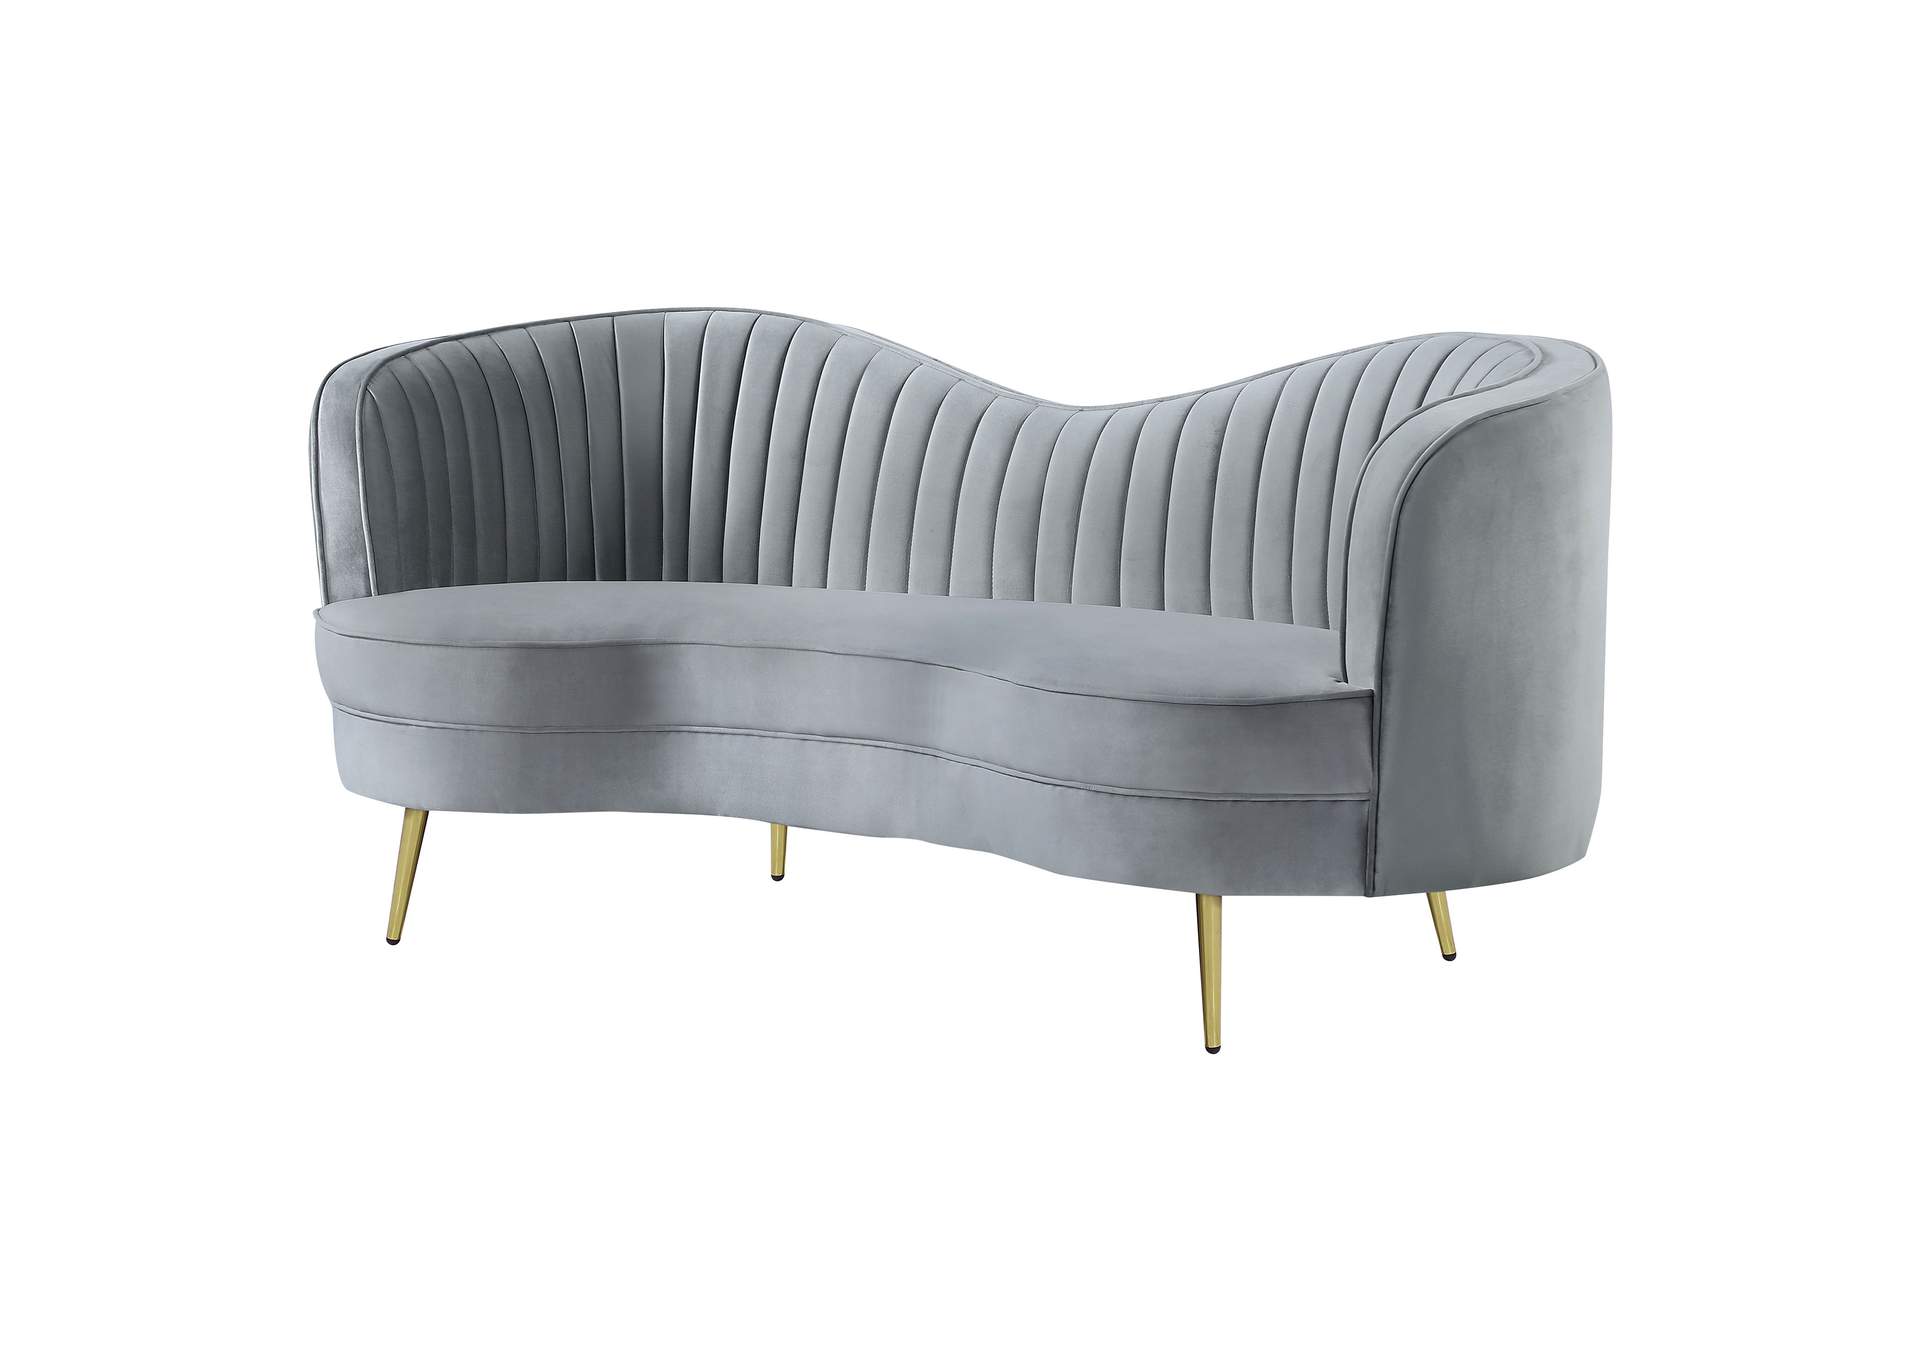 Sophia Upholstered Loveseat with Camel Back Grey and Gold,Coaster Furniture